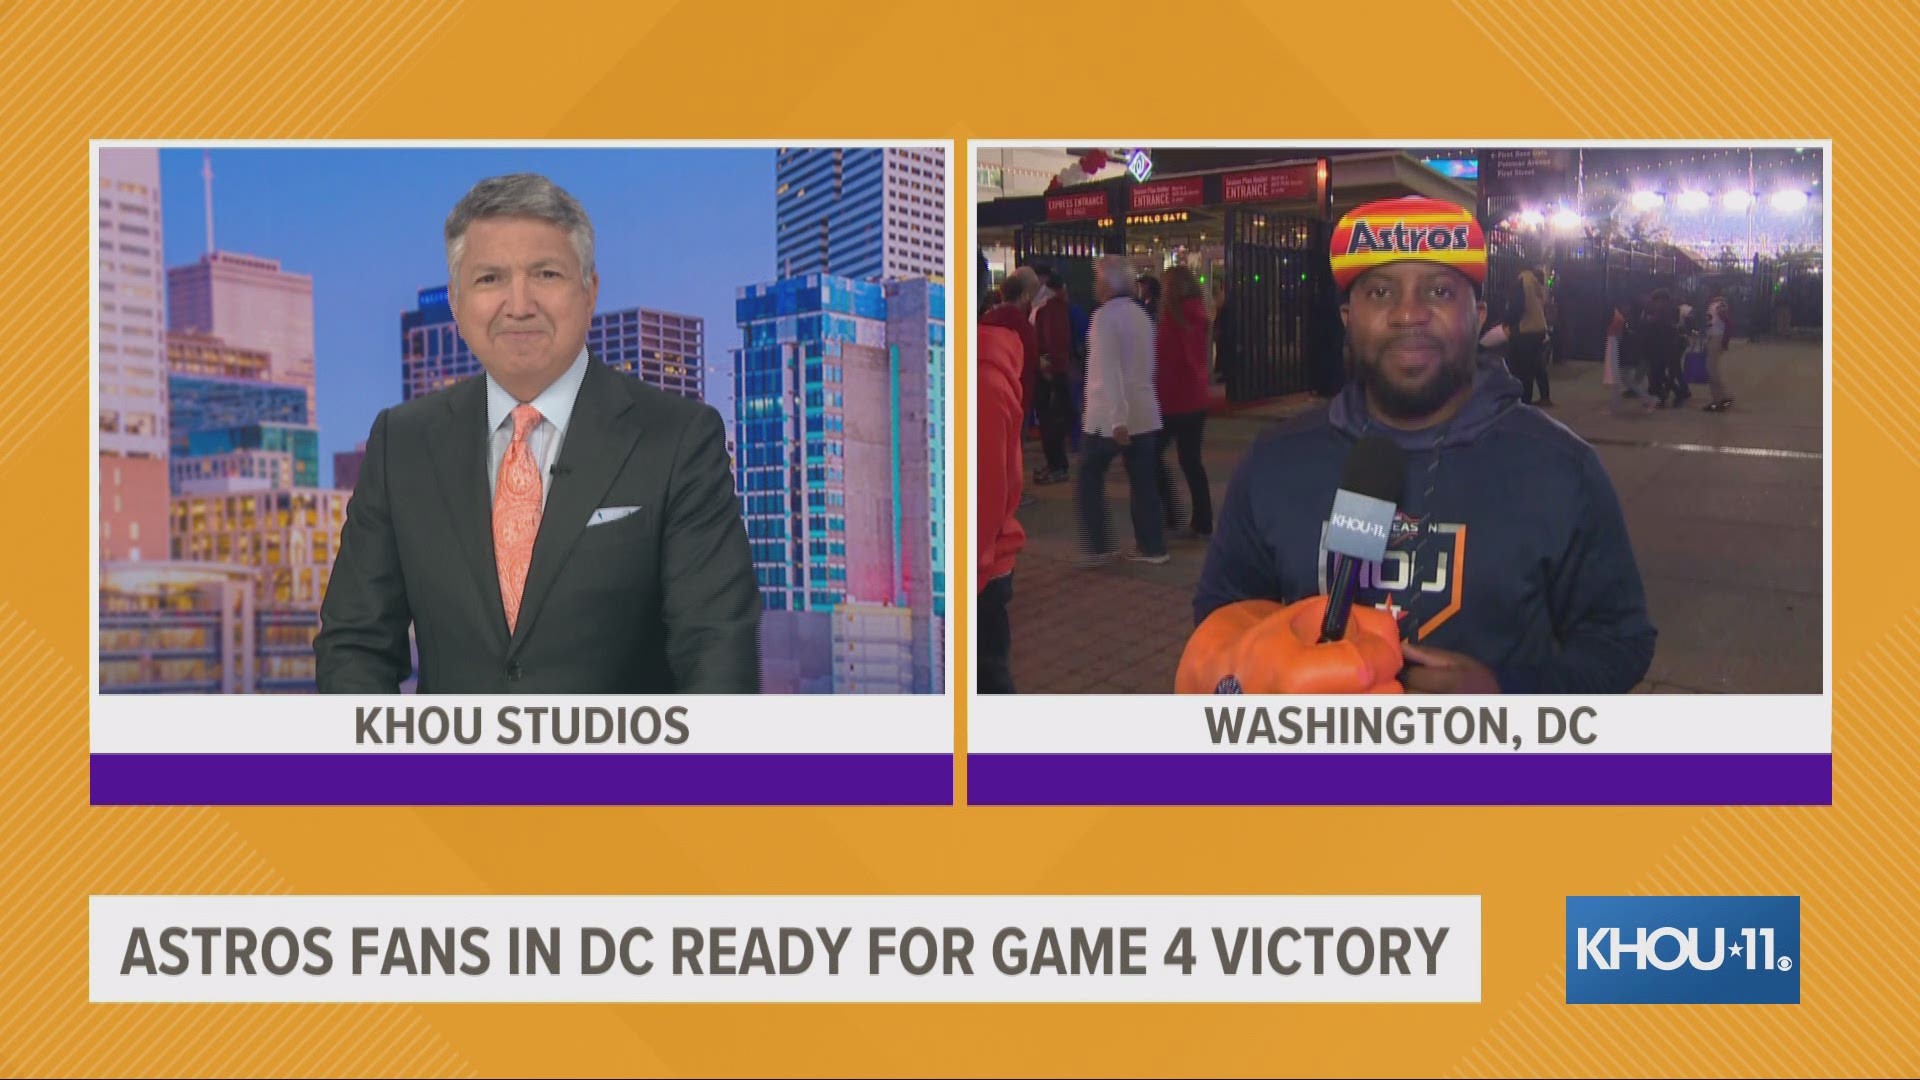 Houston Astros fans in Washington, D.C. were pumped before Game 4 of the World Series.